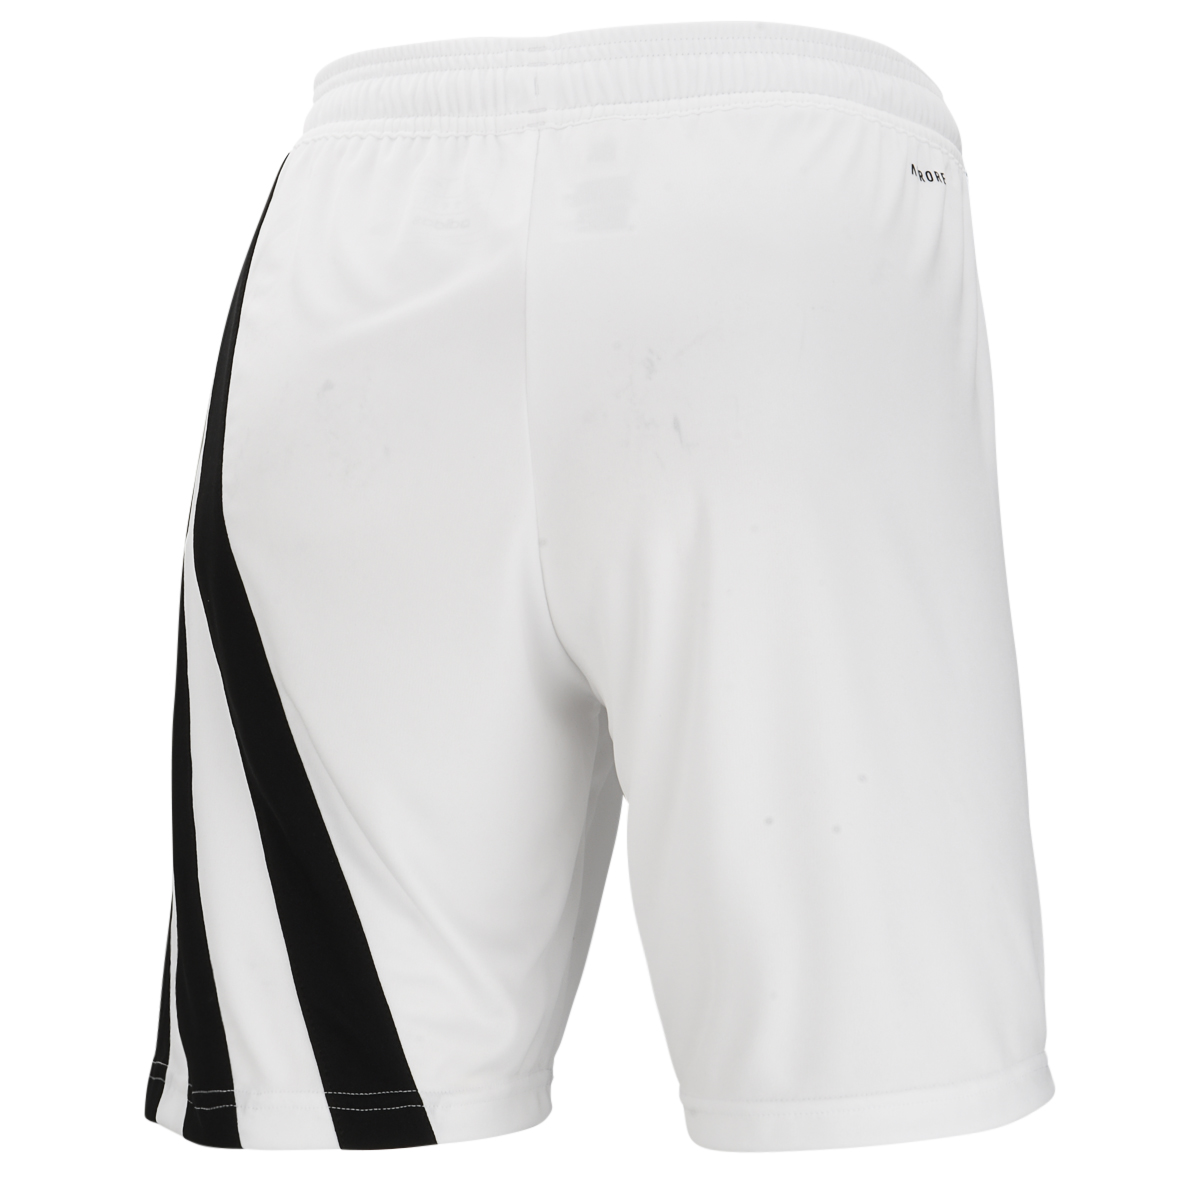 Short Fútbol adidas Fortore 23 Hombre,  image number null